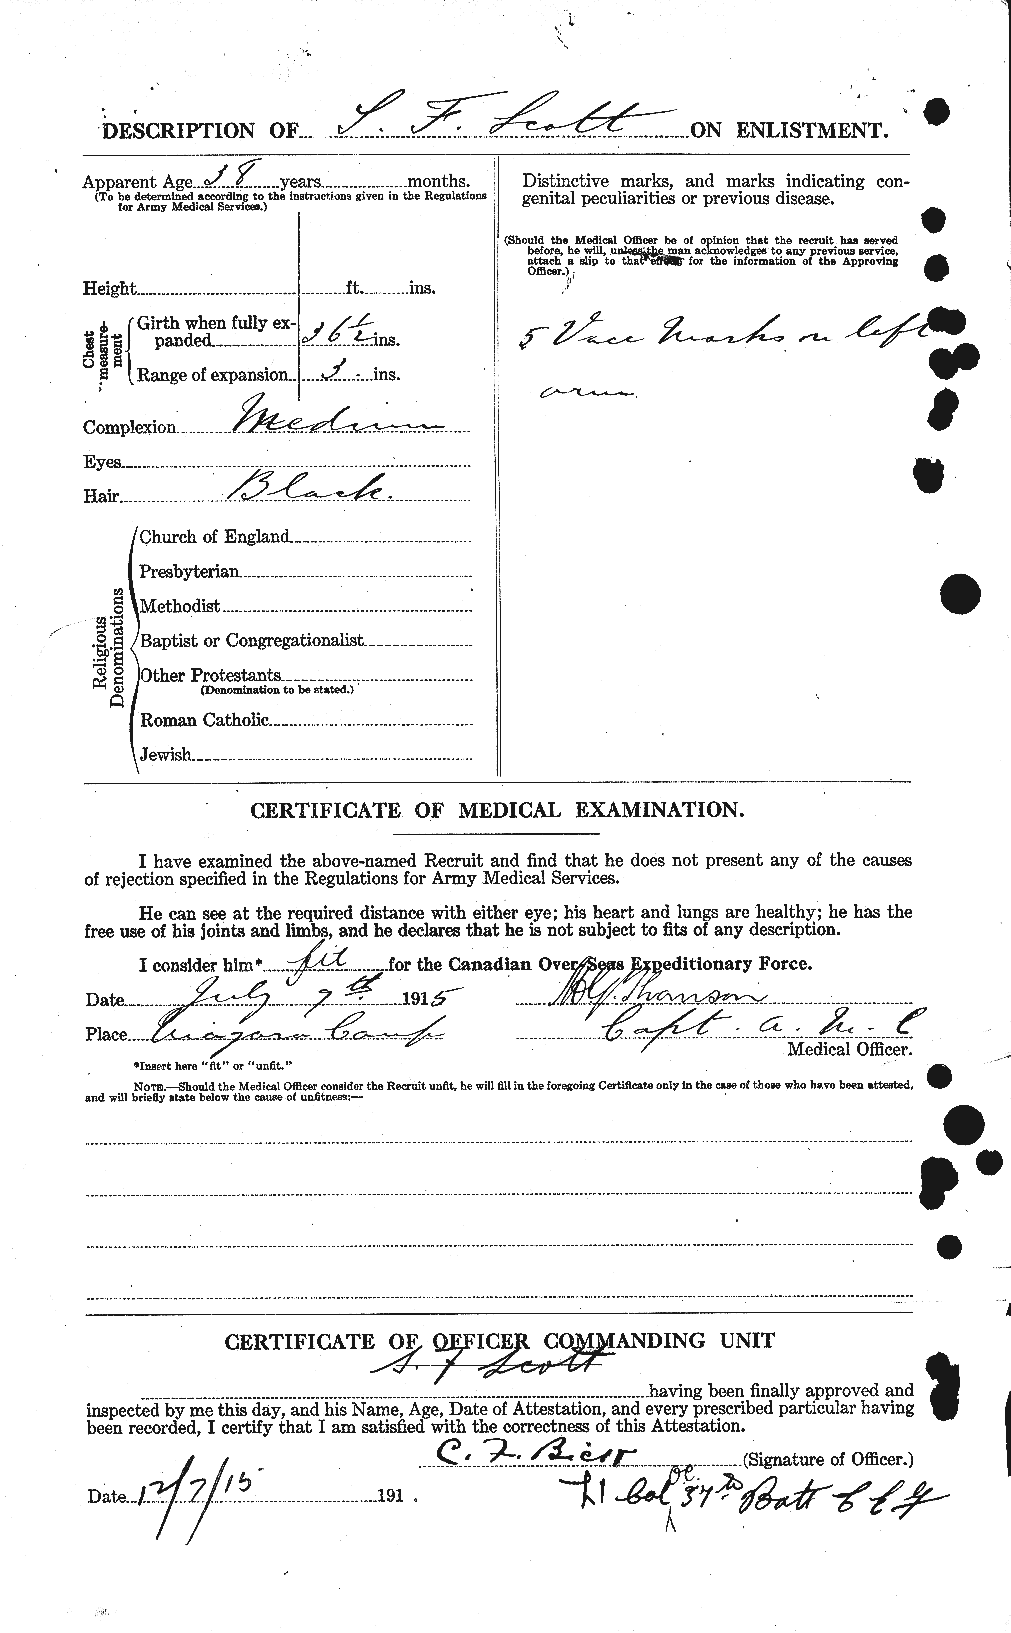 Personnel Records of the First World War - CEF 088848b